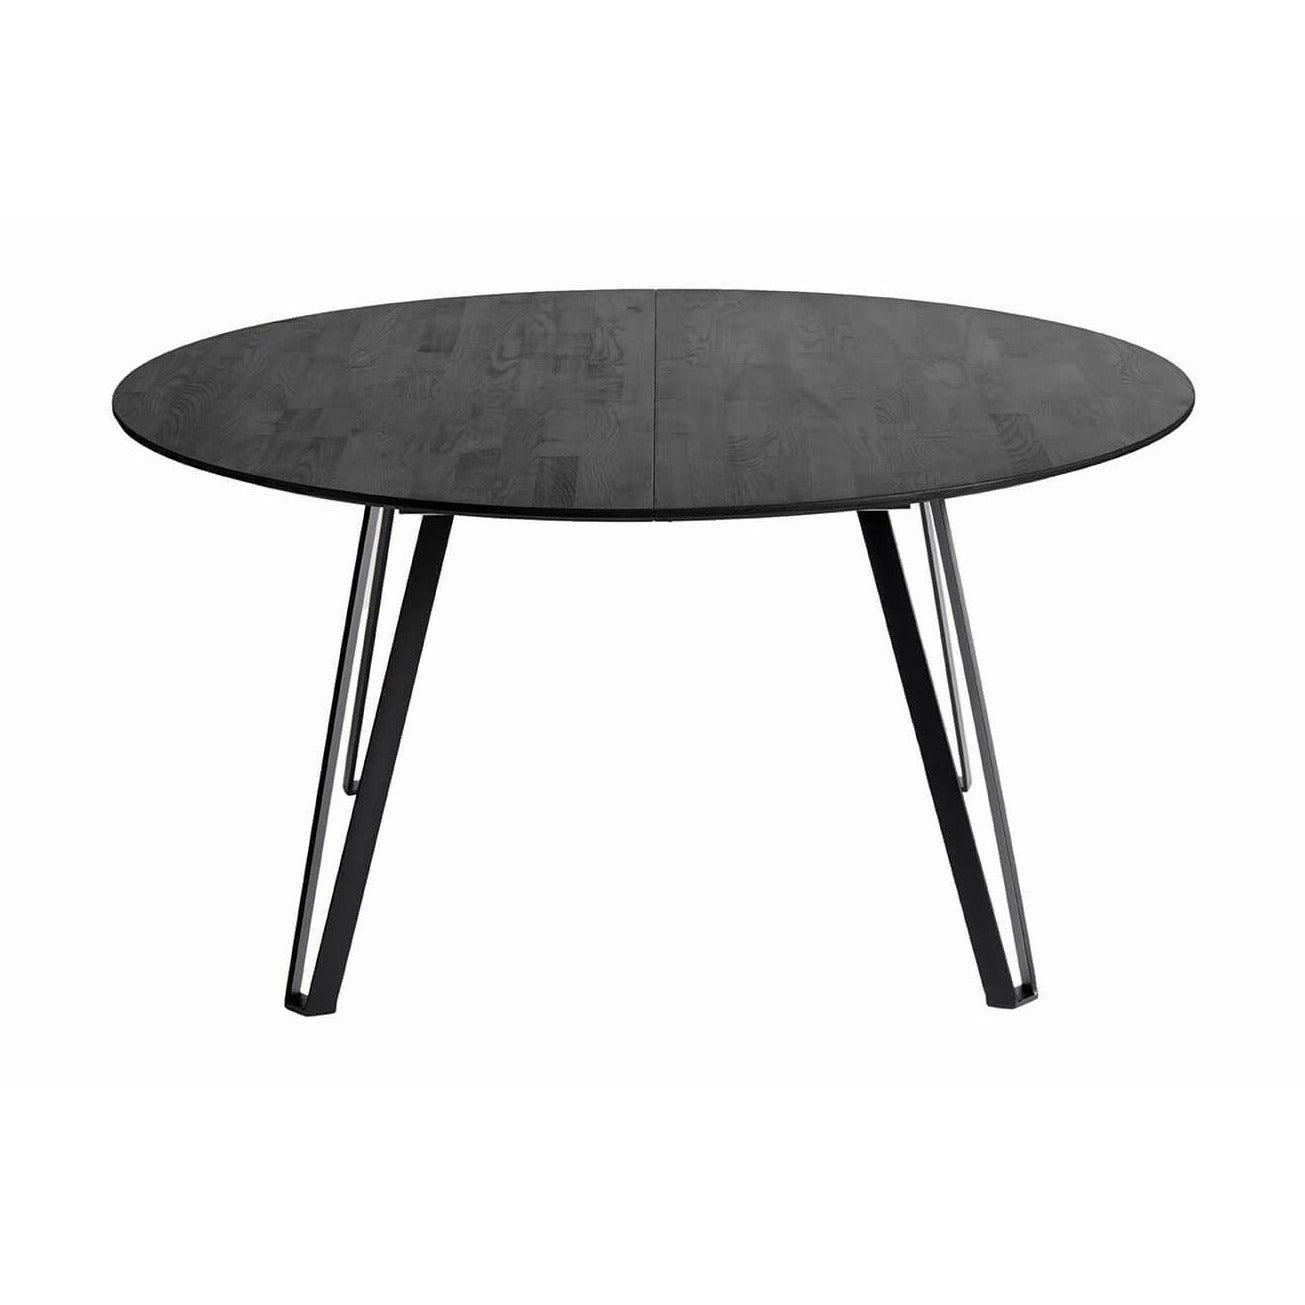 Muubs Space Dining Table Black, Ø150cm